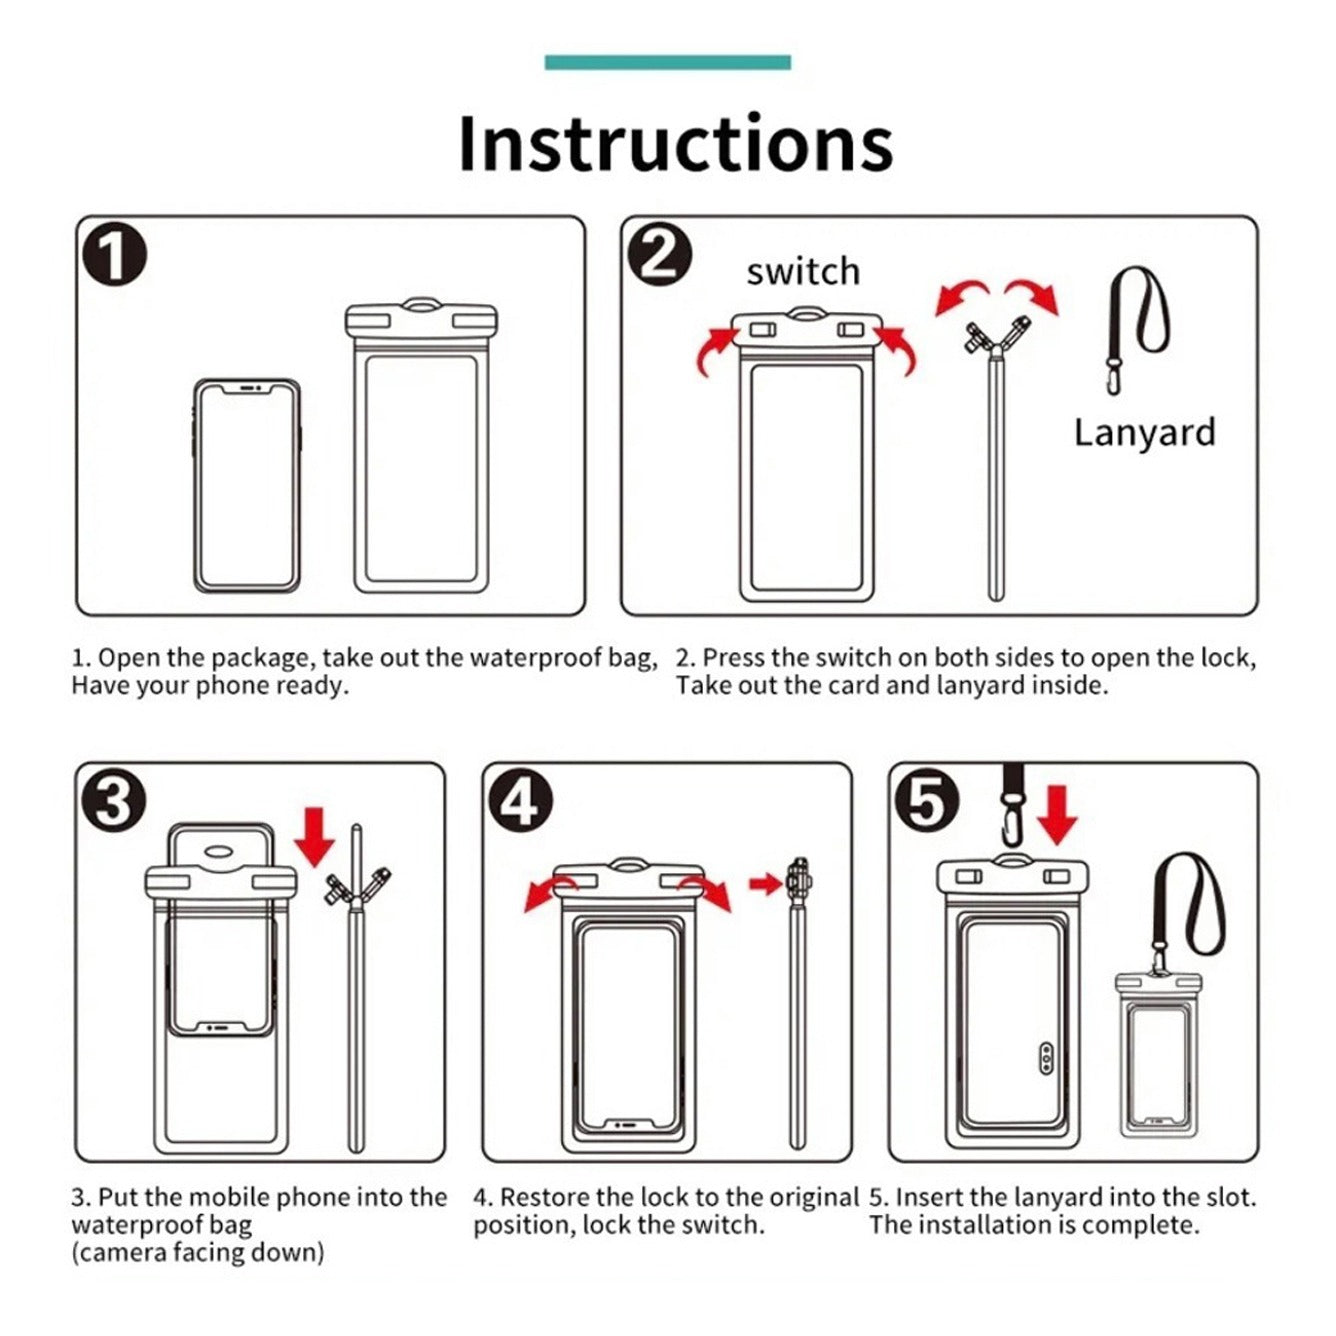 Universal Waterproof Phone Bag with instructions